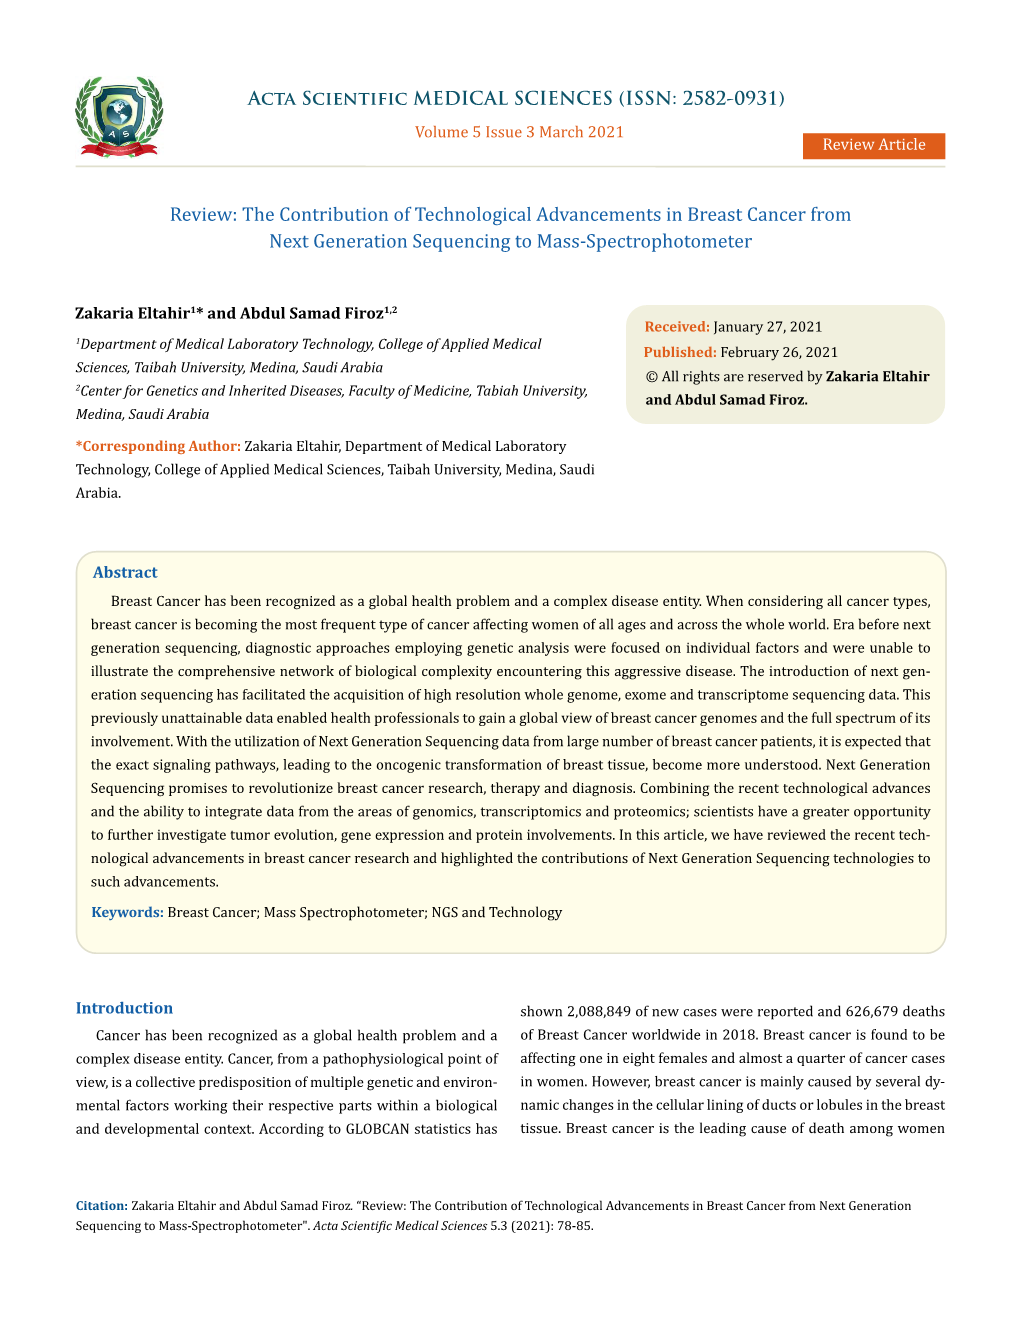 The Contribution of Technological Advancements in Breast Cancer from Next Generation Sequencing to Mass-Spectrophotometer